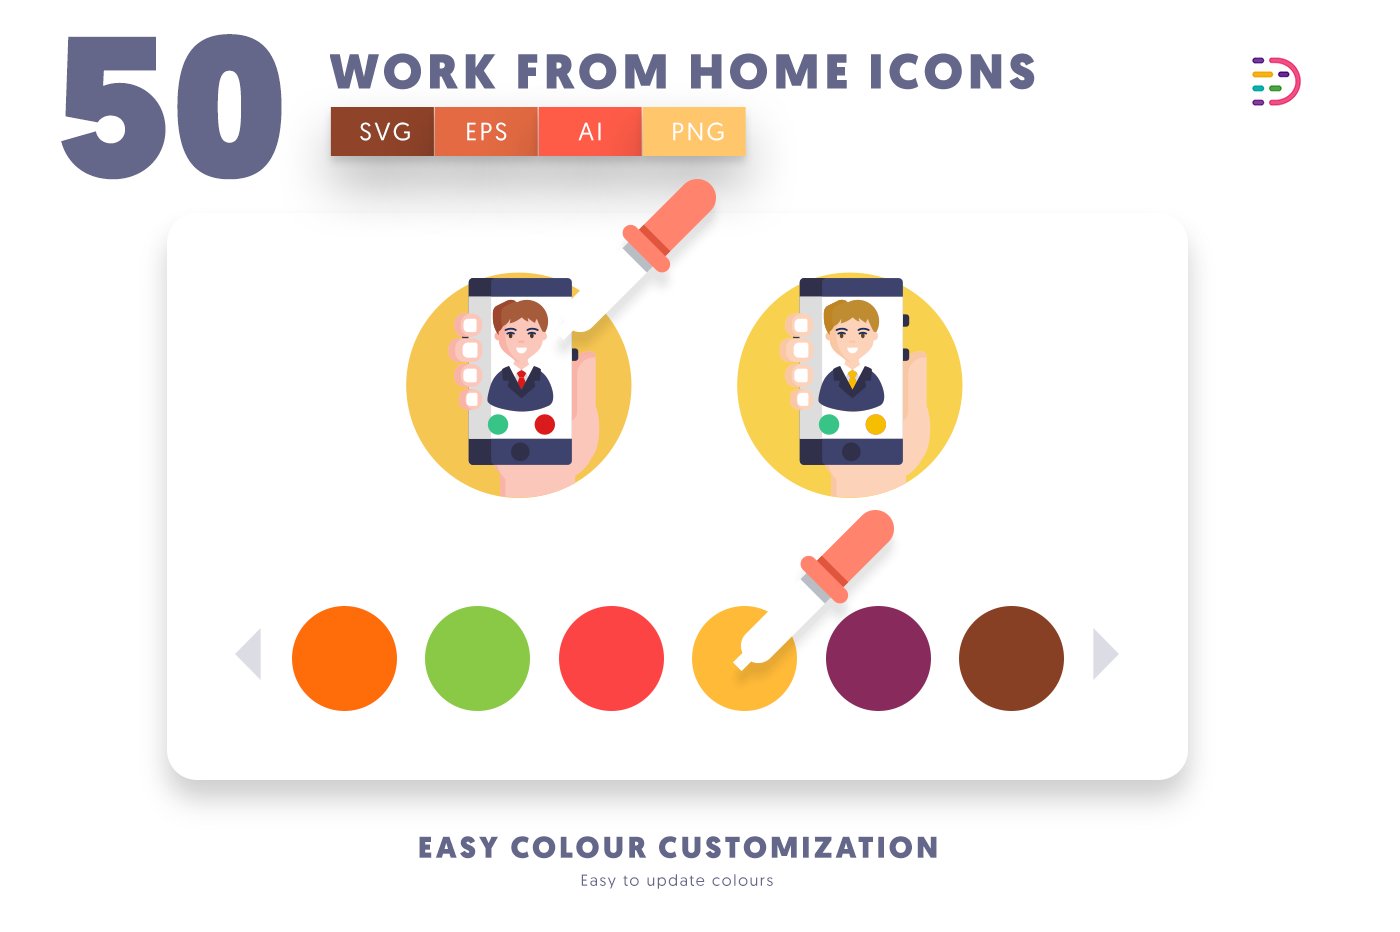 workfromhome icons cover 7 968